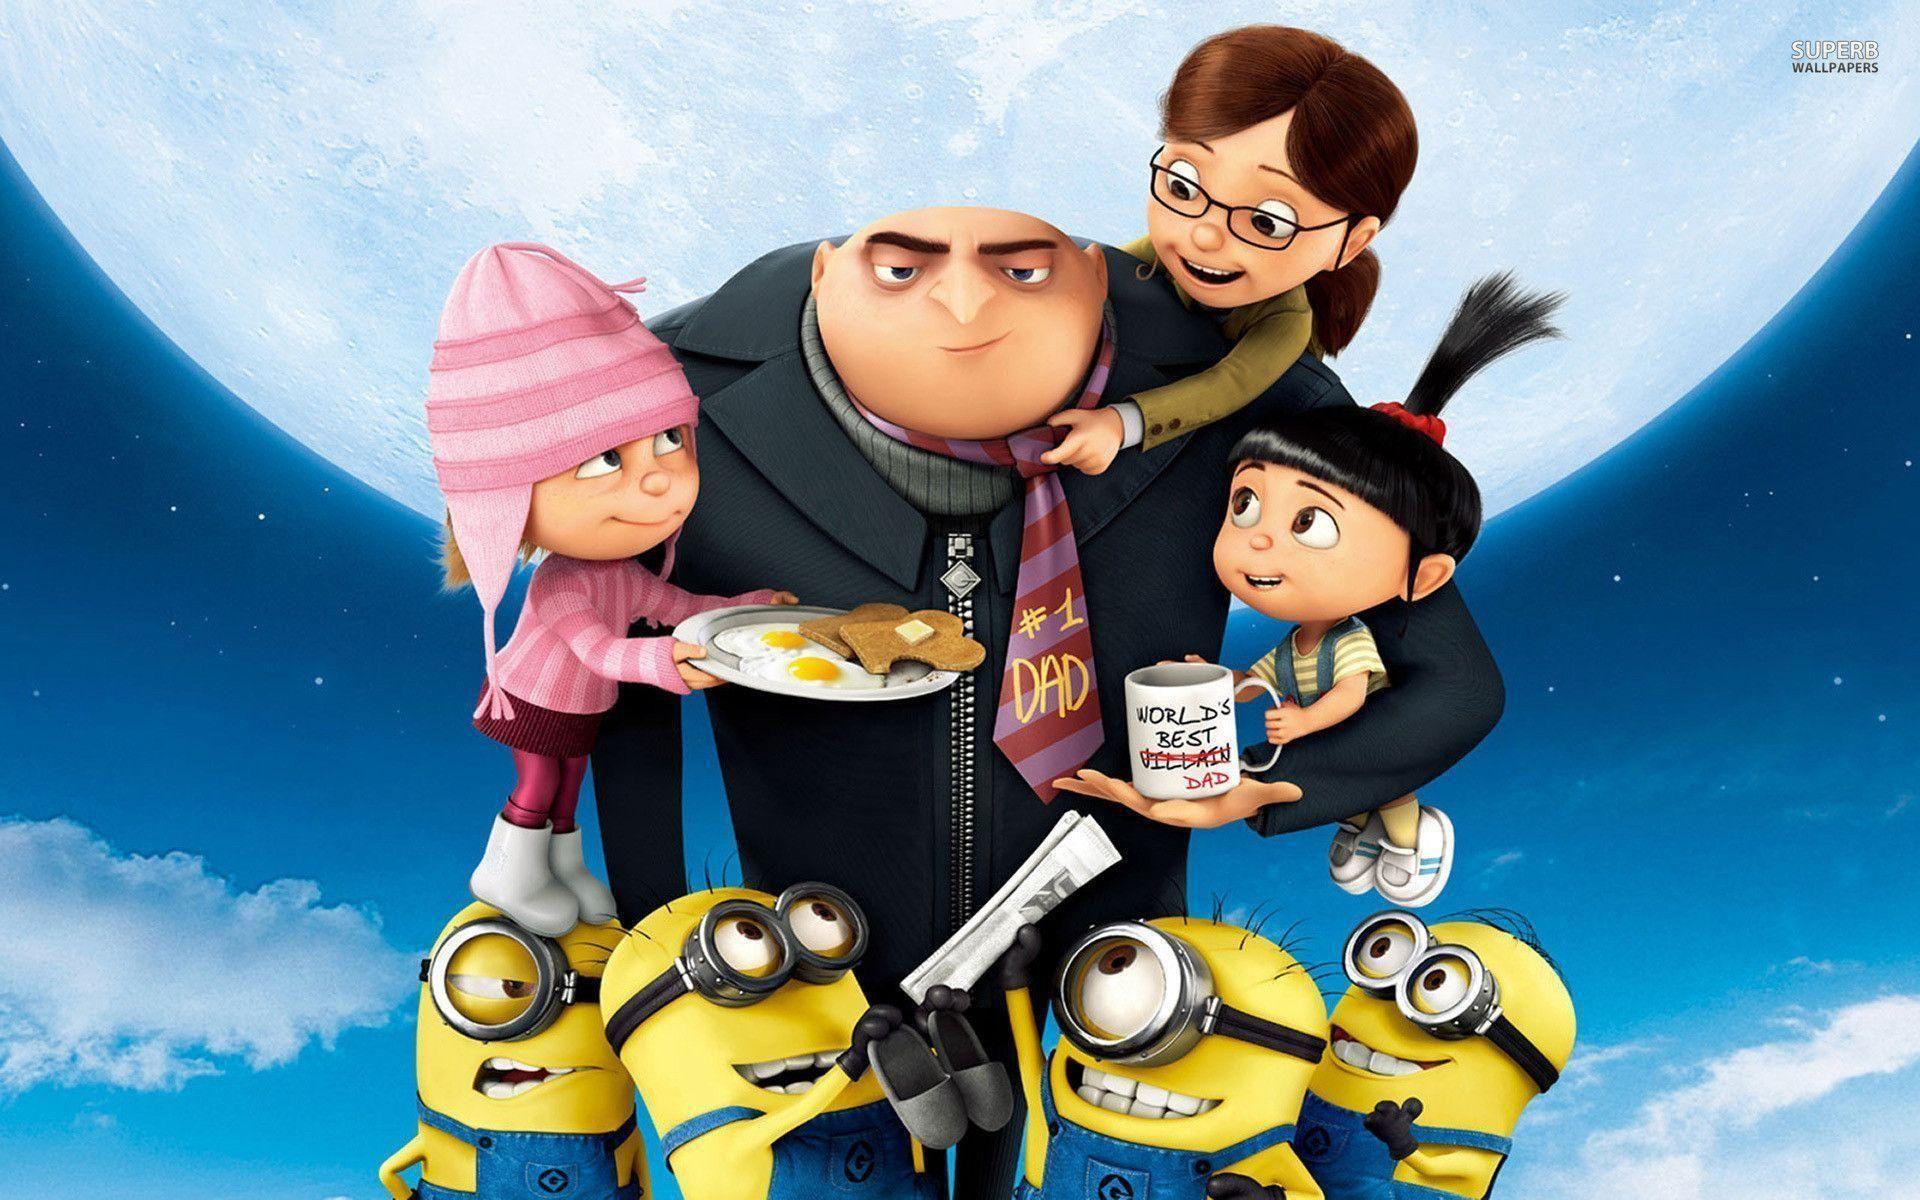 Despicable me 3  Gru and the minions 4K wallpaper download